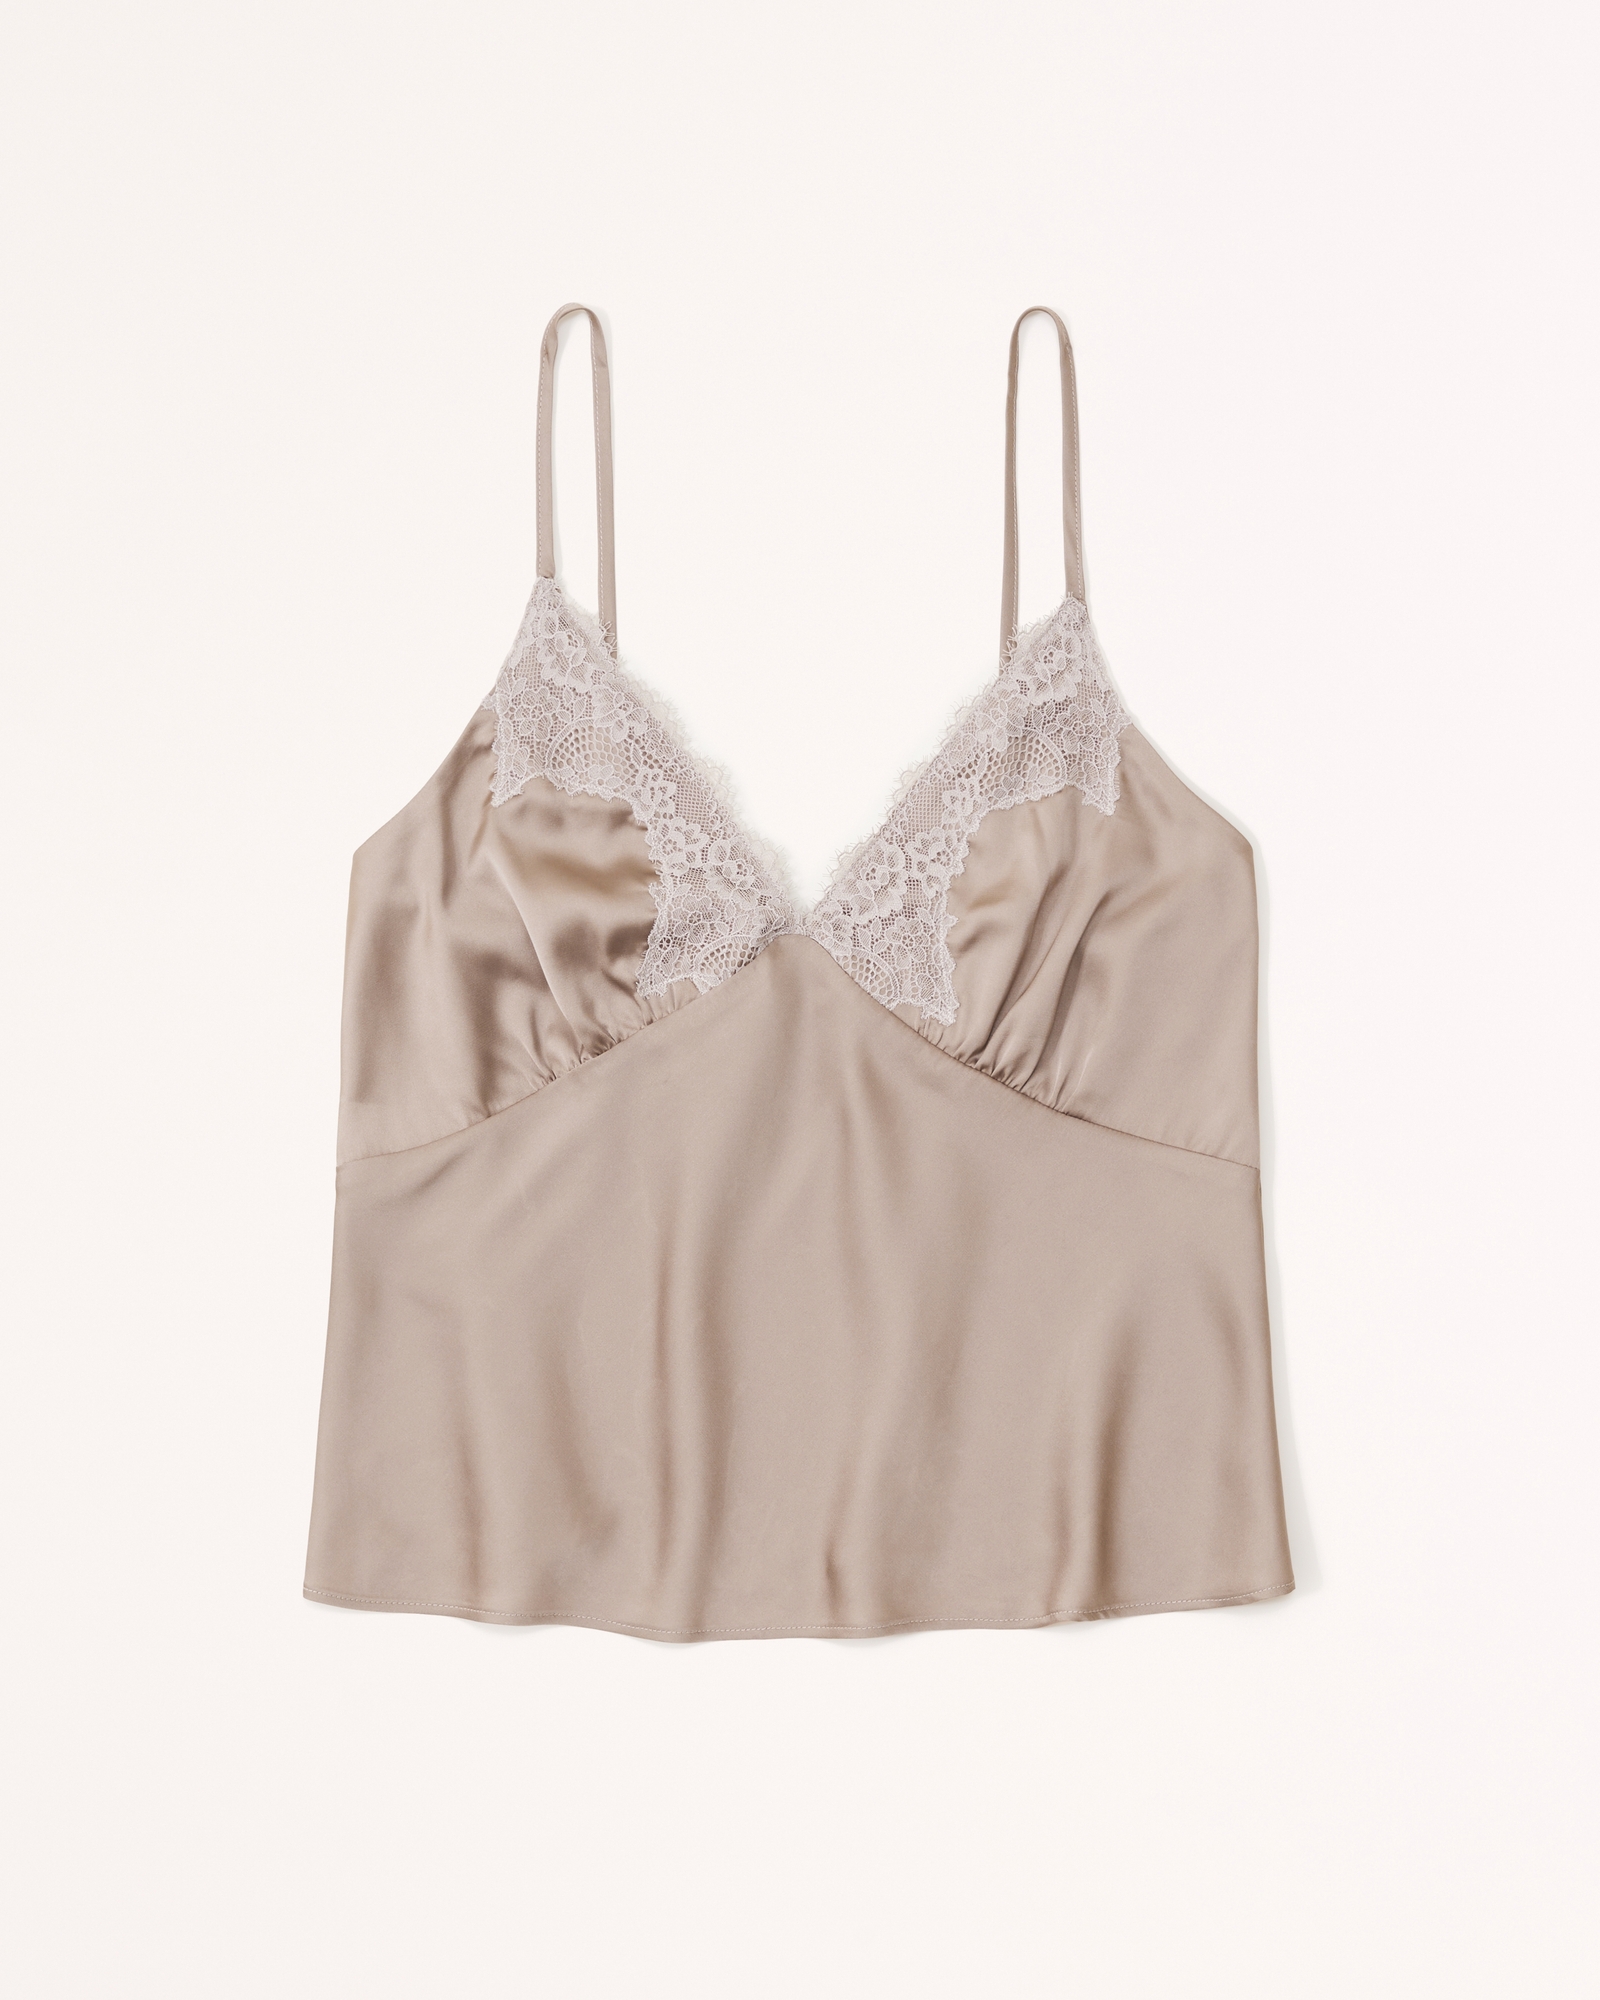 Abercrombie & Fitch silky satin/lace button front cream dressy camisole top  S